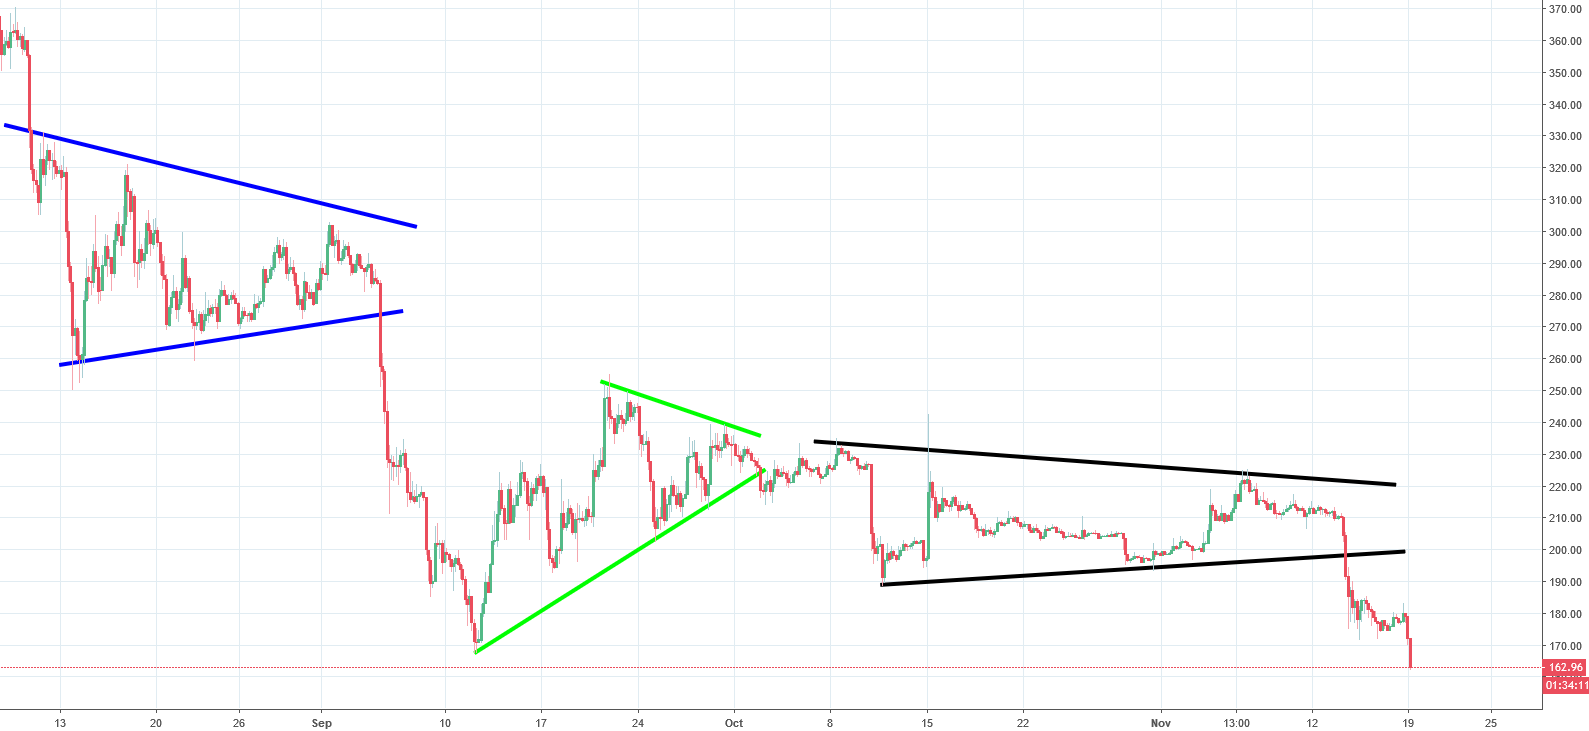 Ethereum Analysis - expect more decline!